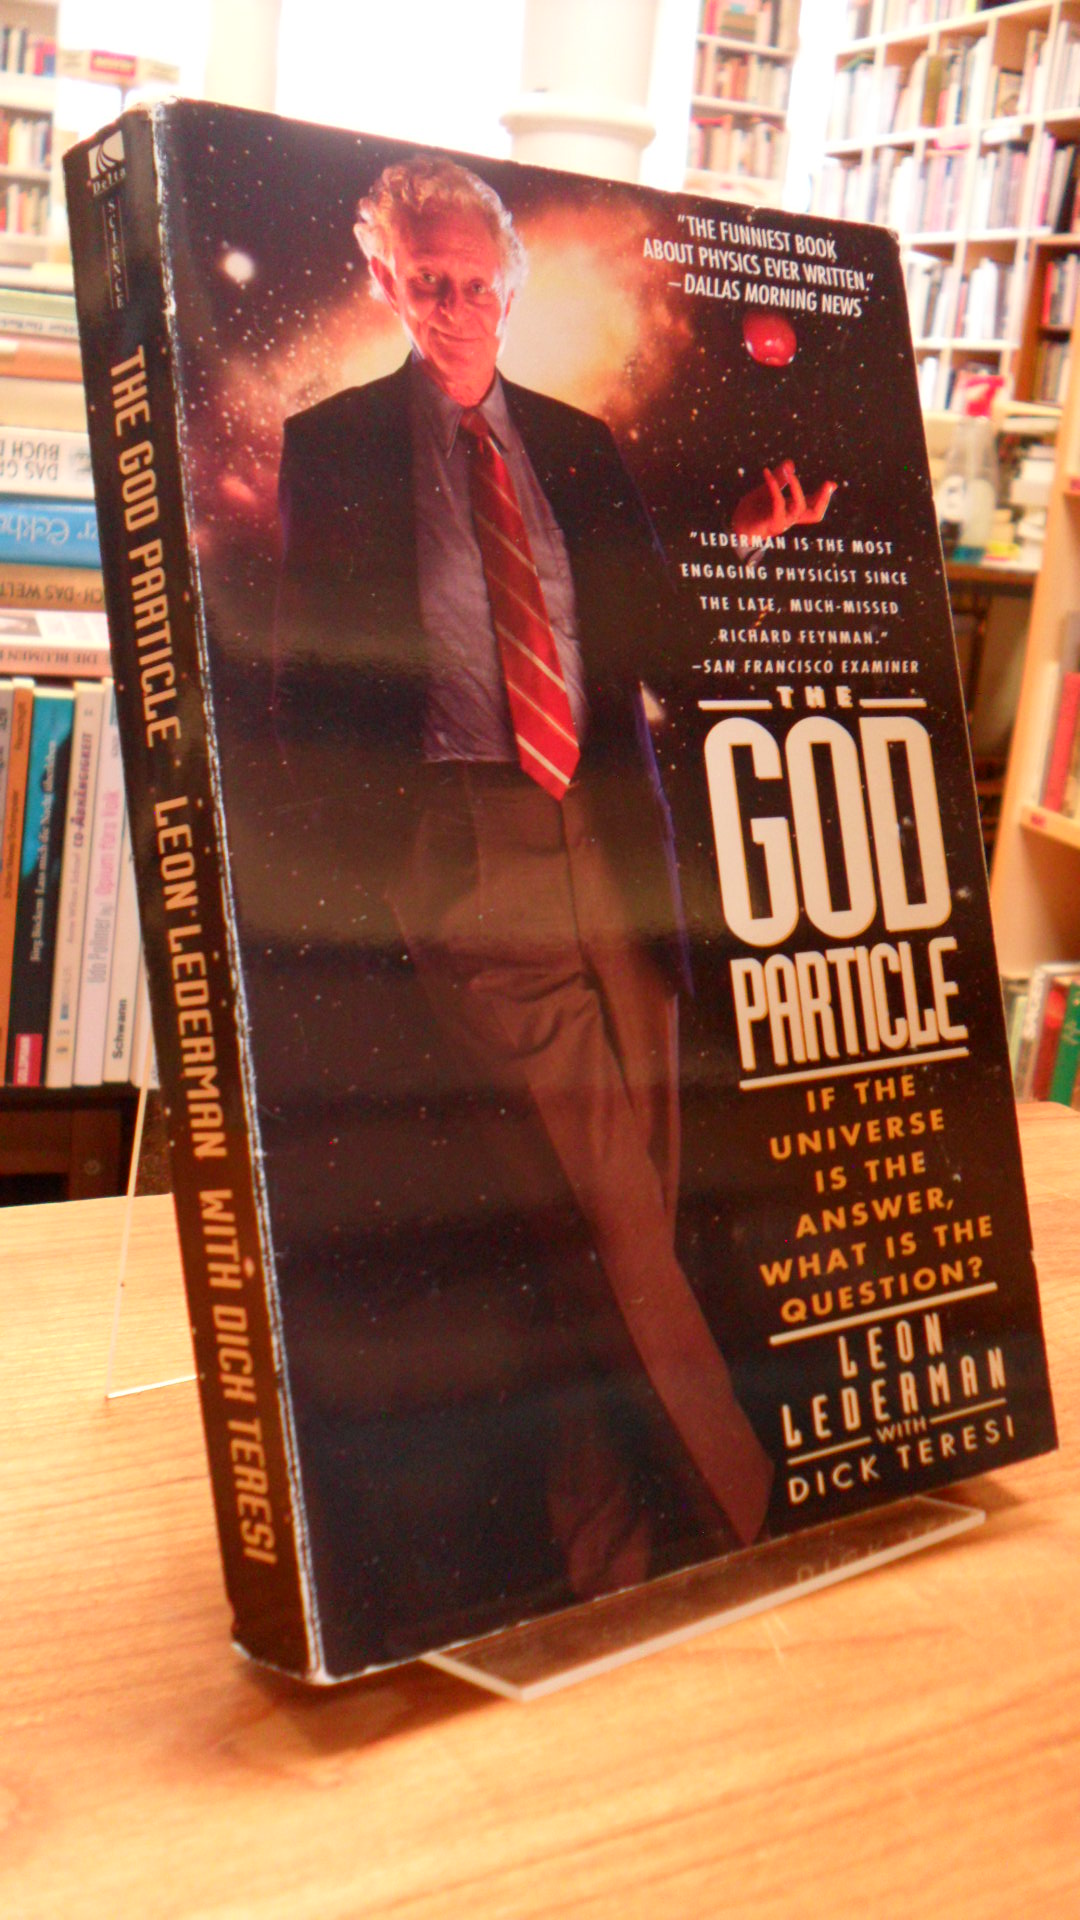 Lederman, The God Particle – If The Universe Is The Answer What Is The Question?